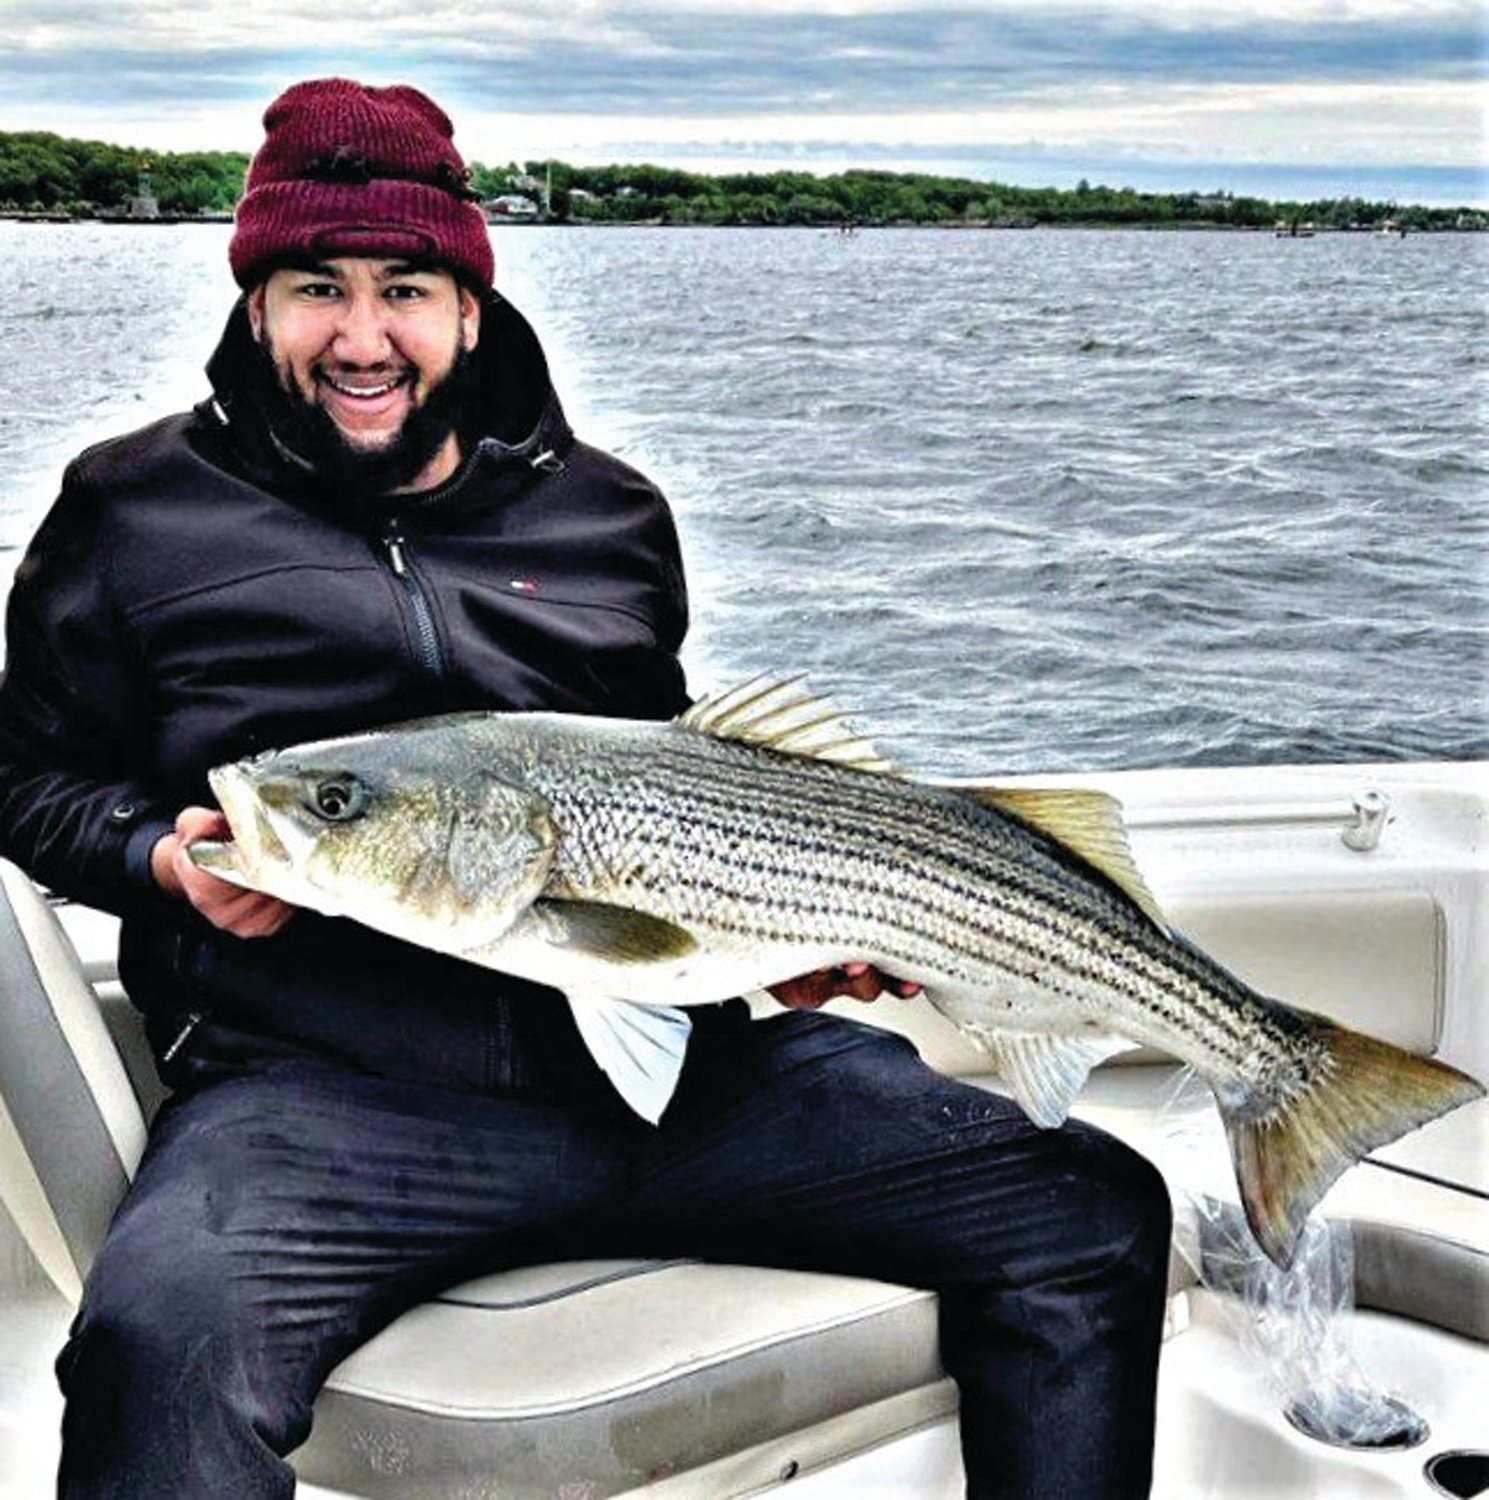 WHAT’S THE CATCH: Leo Beras of Providence with a striped bass caught last week in the East Passage of Narragansett Bay.